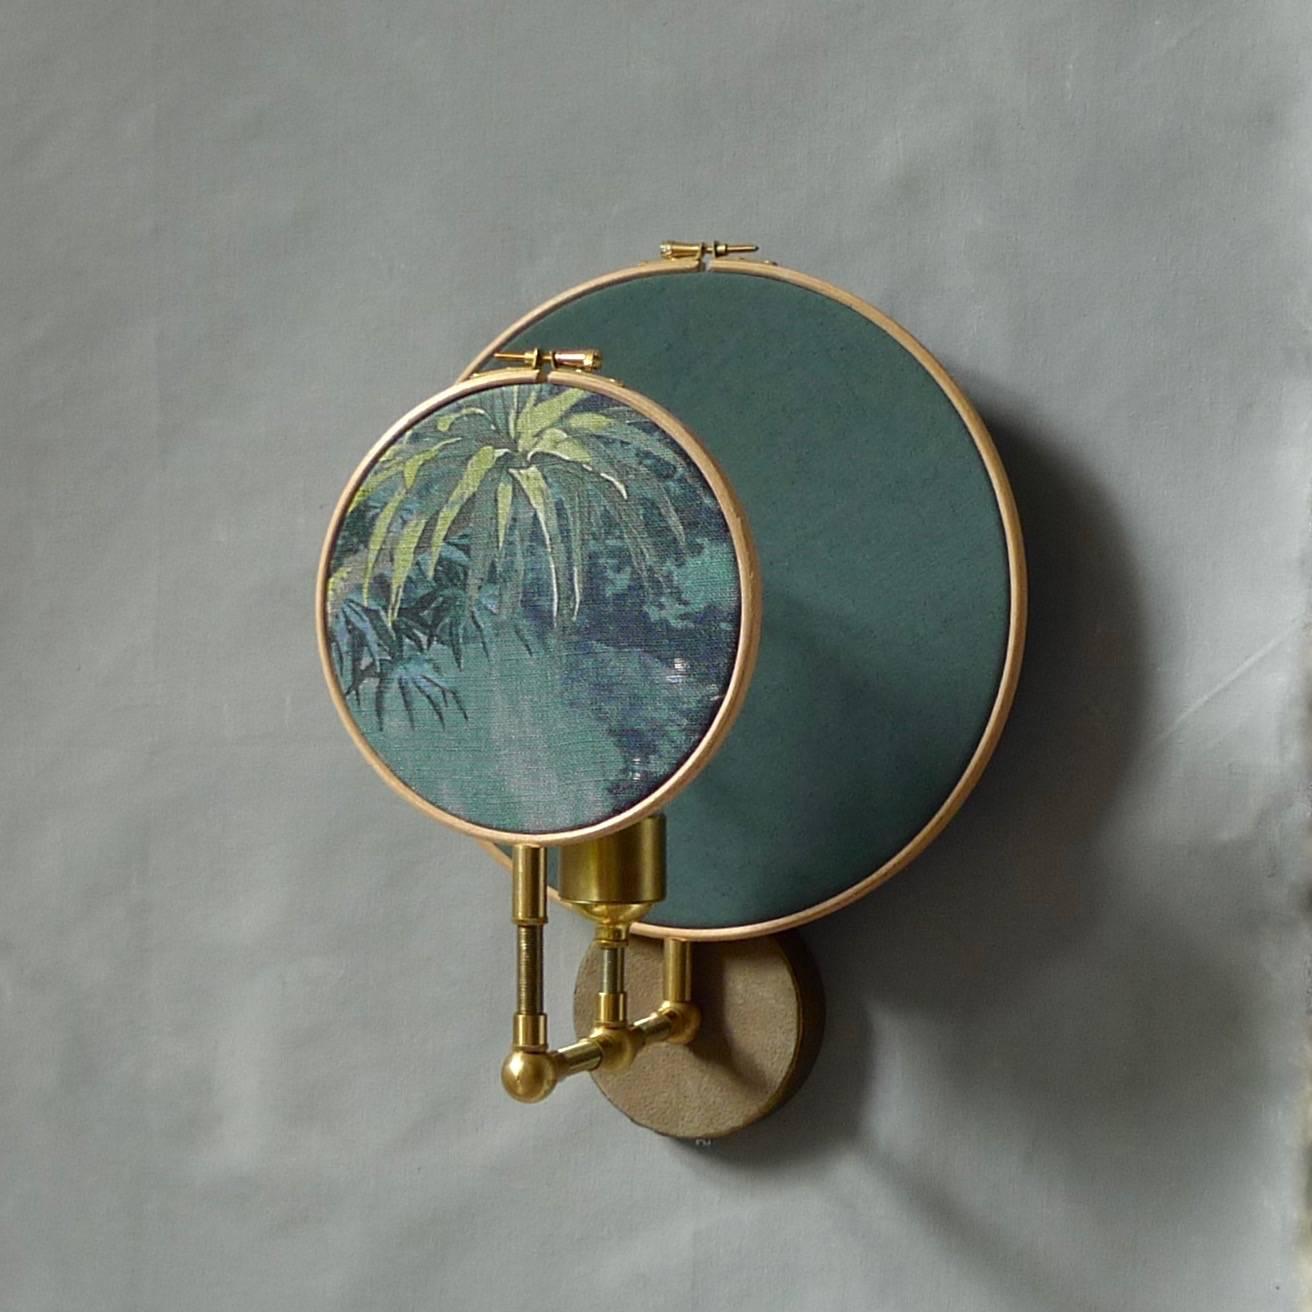 Circle blue grey wall sconce, Sander Bottinga
Handmade in brass, leather, wood and hand printed and painted linen.
A dimmer is inlaid with leather. Also possible without a dimmer
Dimensions: H 35 x W 27 x D 23 cm
The design artwork is meticulously